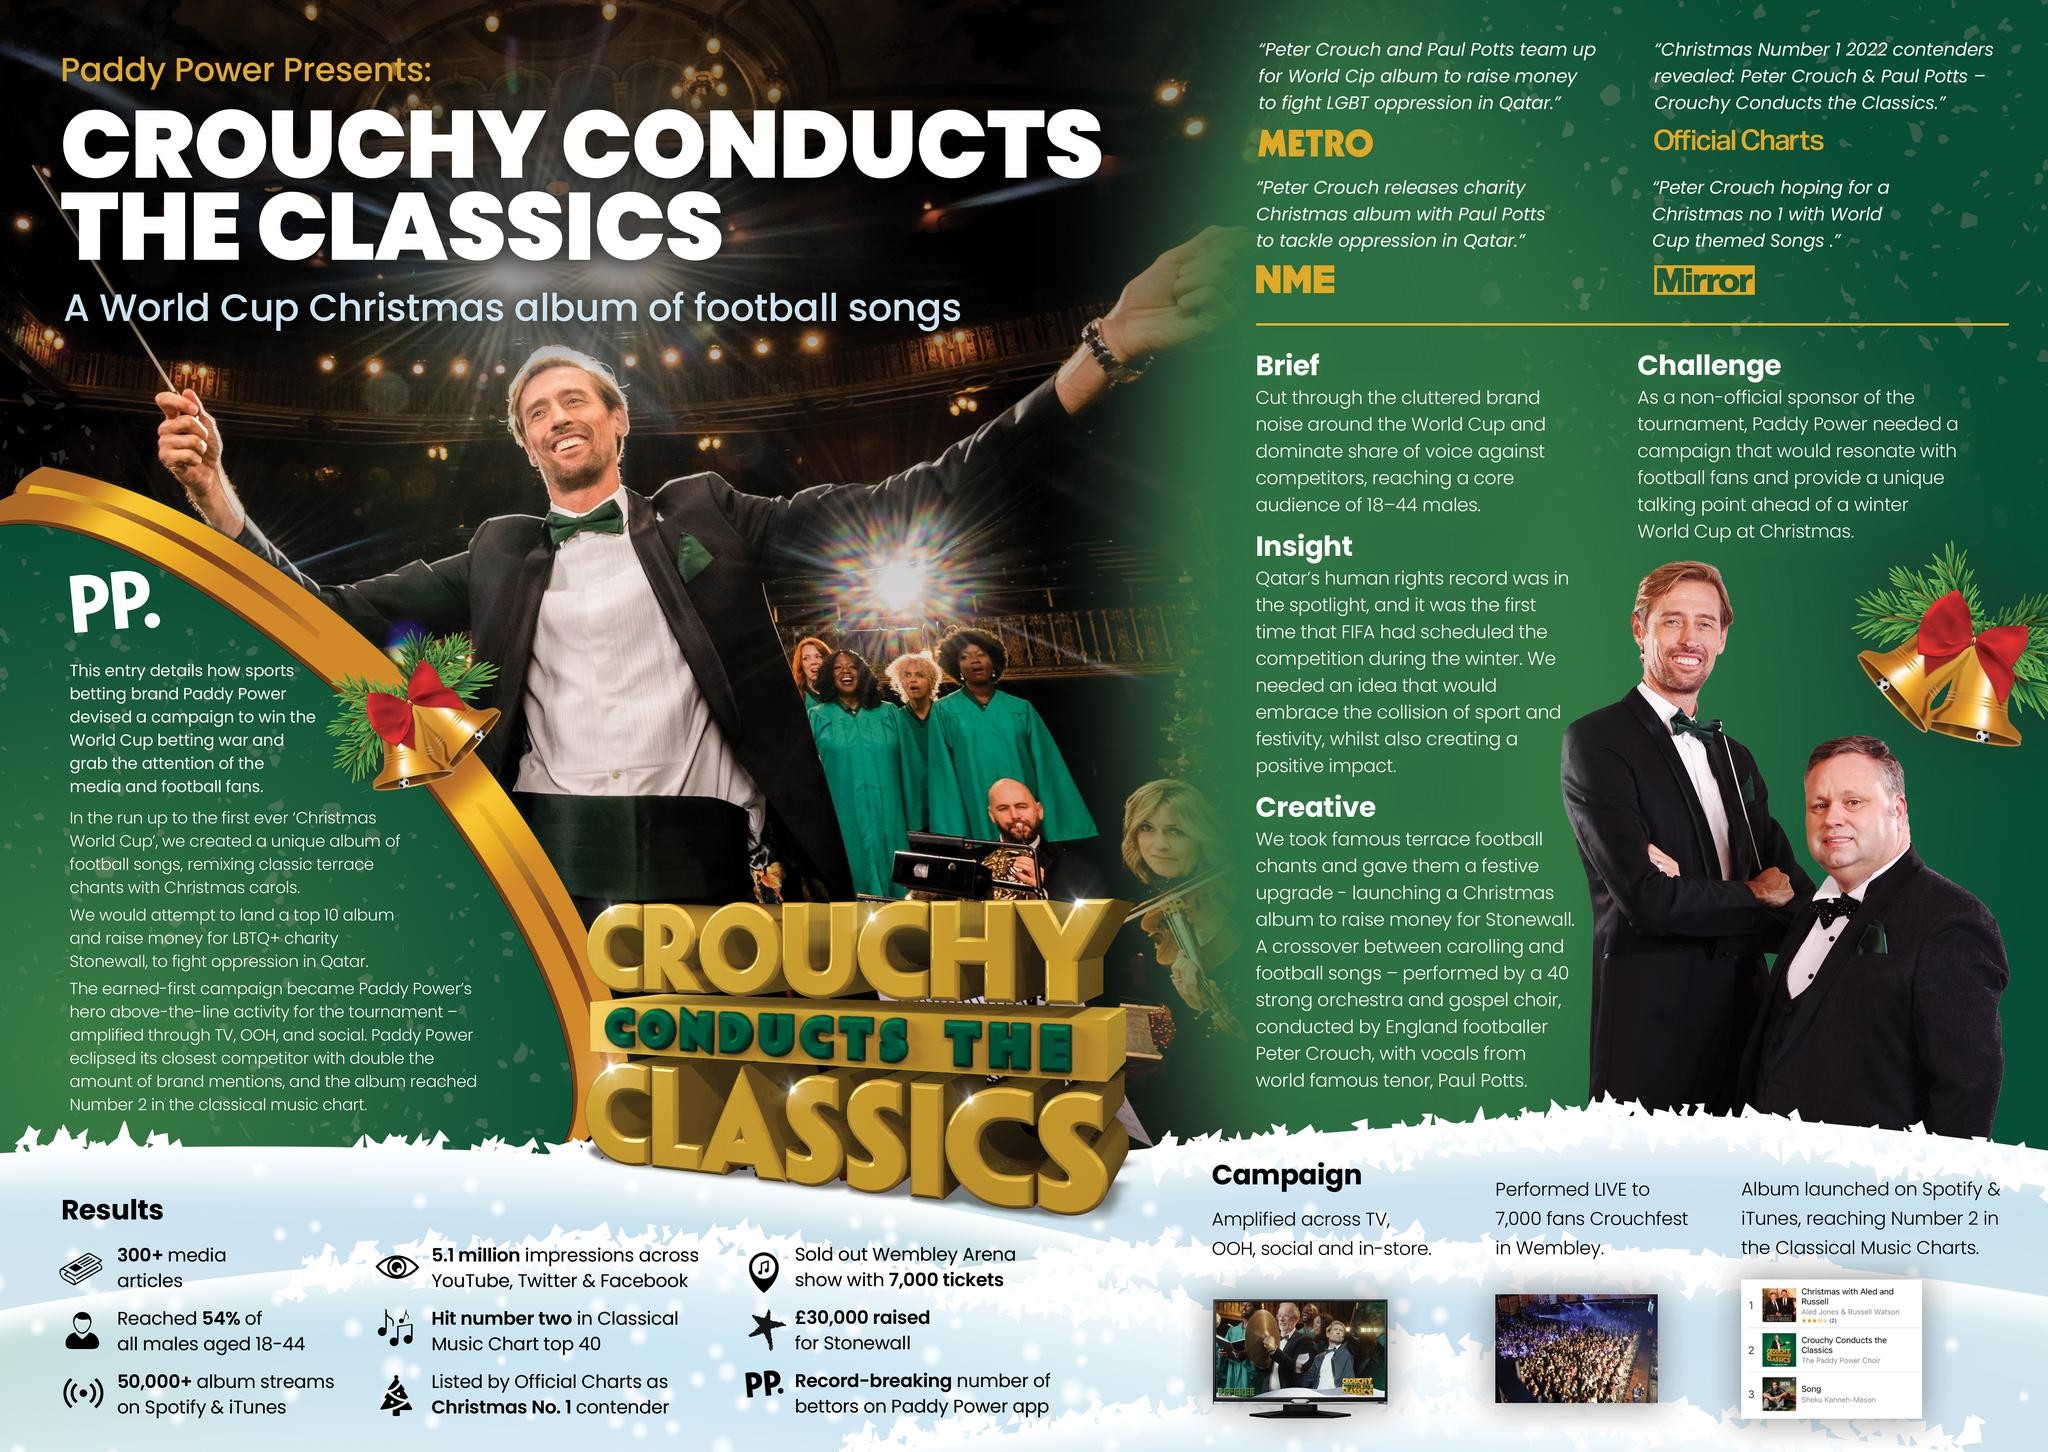 Crouchy Conducts the Classics